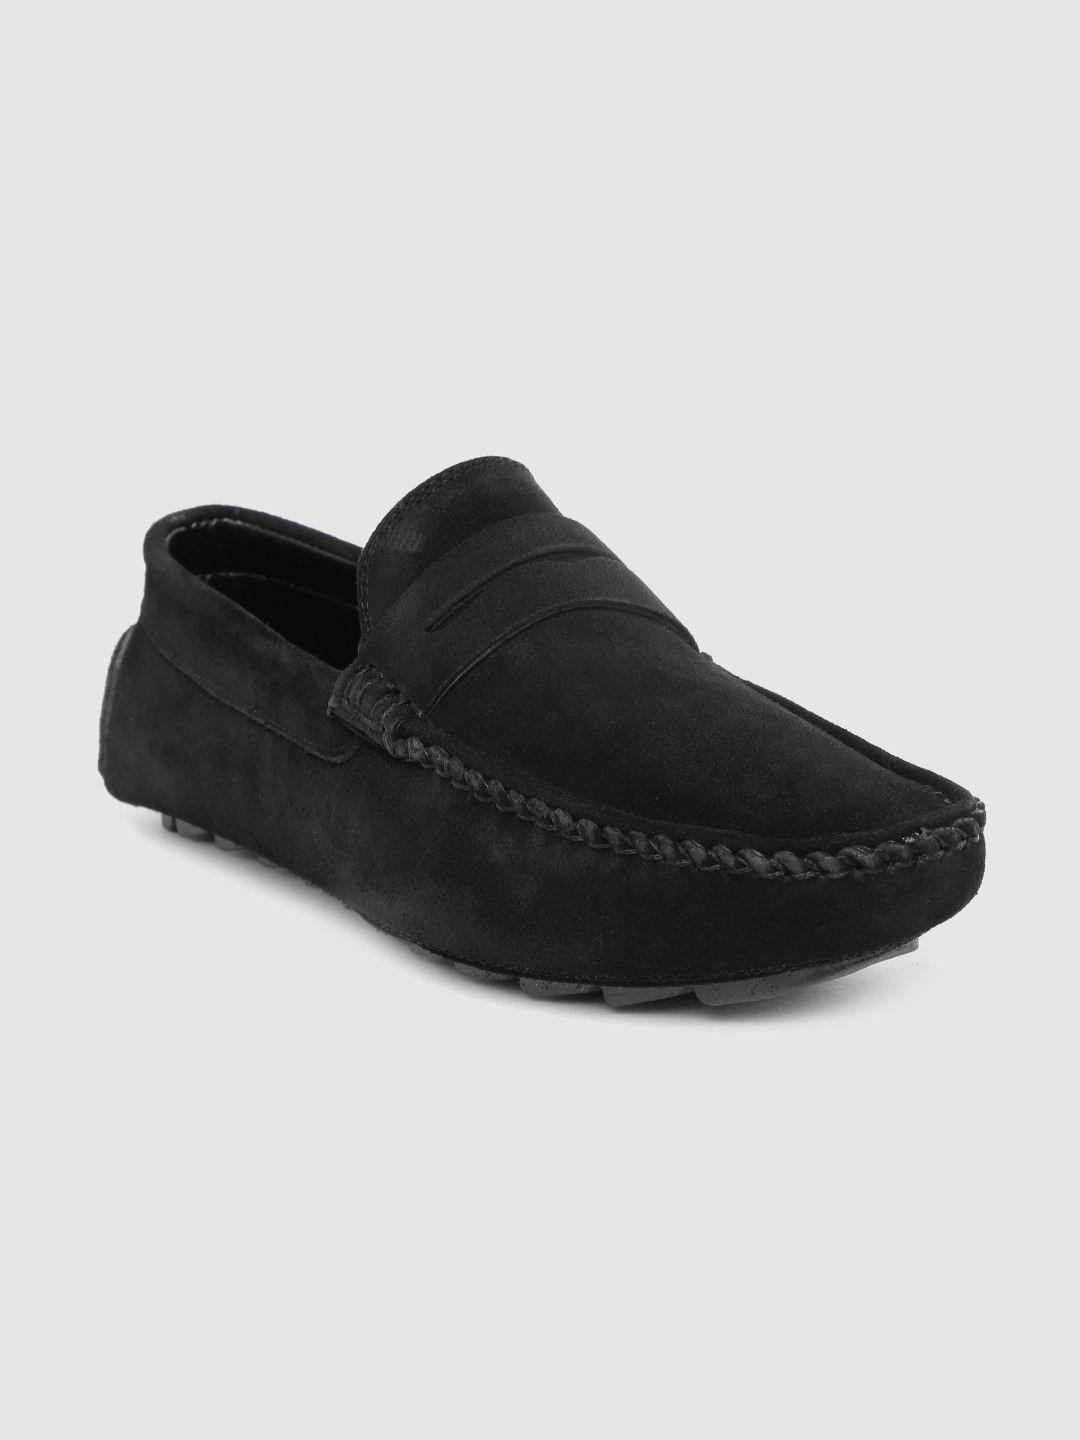 louis stitch men black solid handmade suede penny loafers